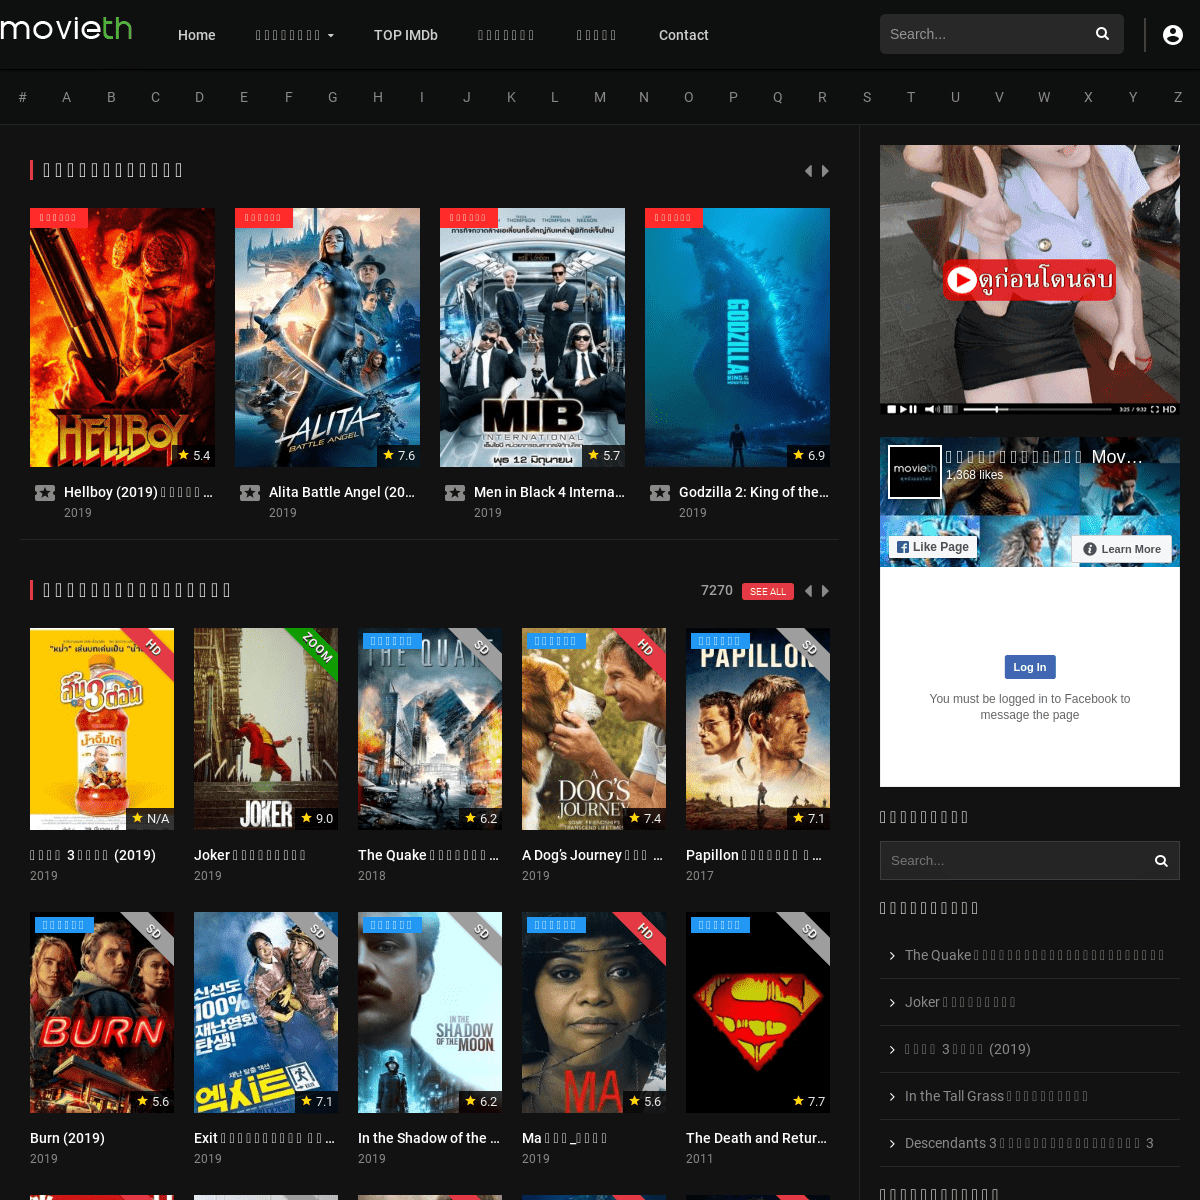 A complete backup of movieth-hd.com